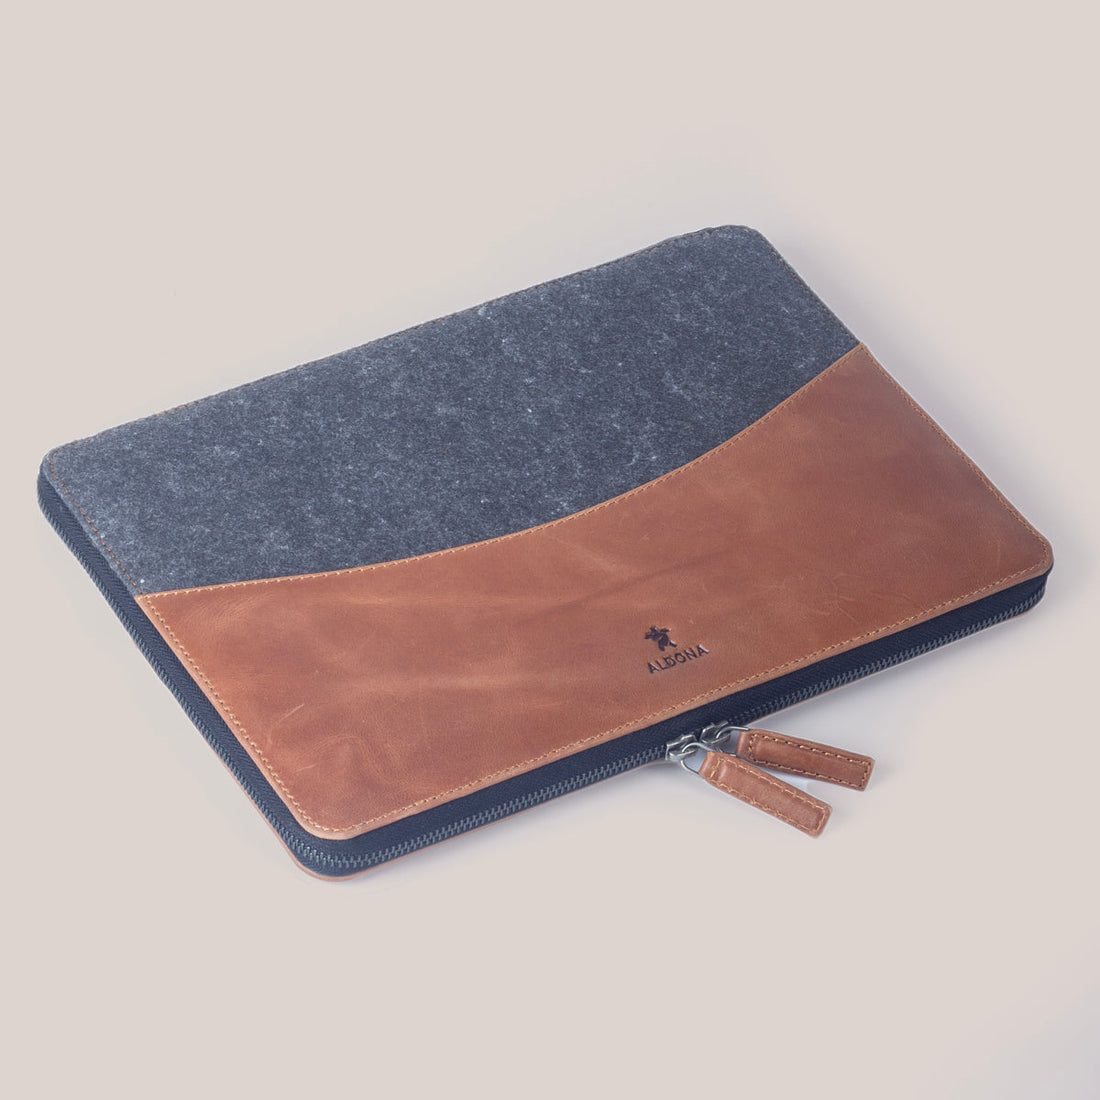 Microsoft Surface Book 13.5 Zippered Laptop Case - Burnt Tobacco